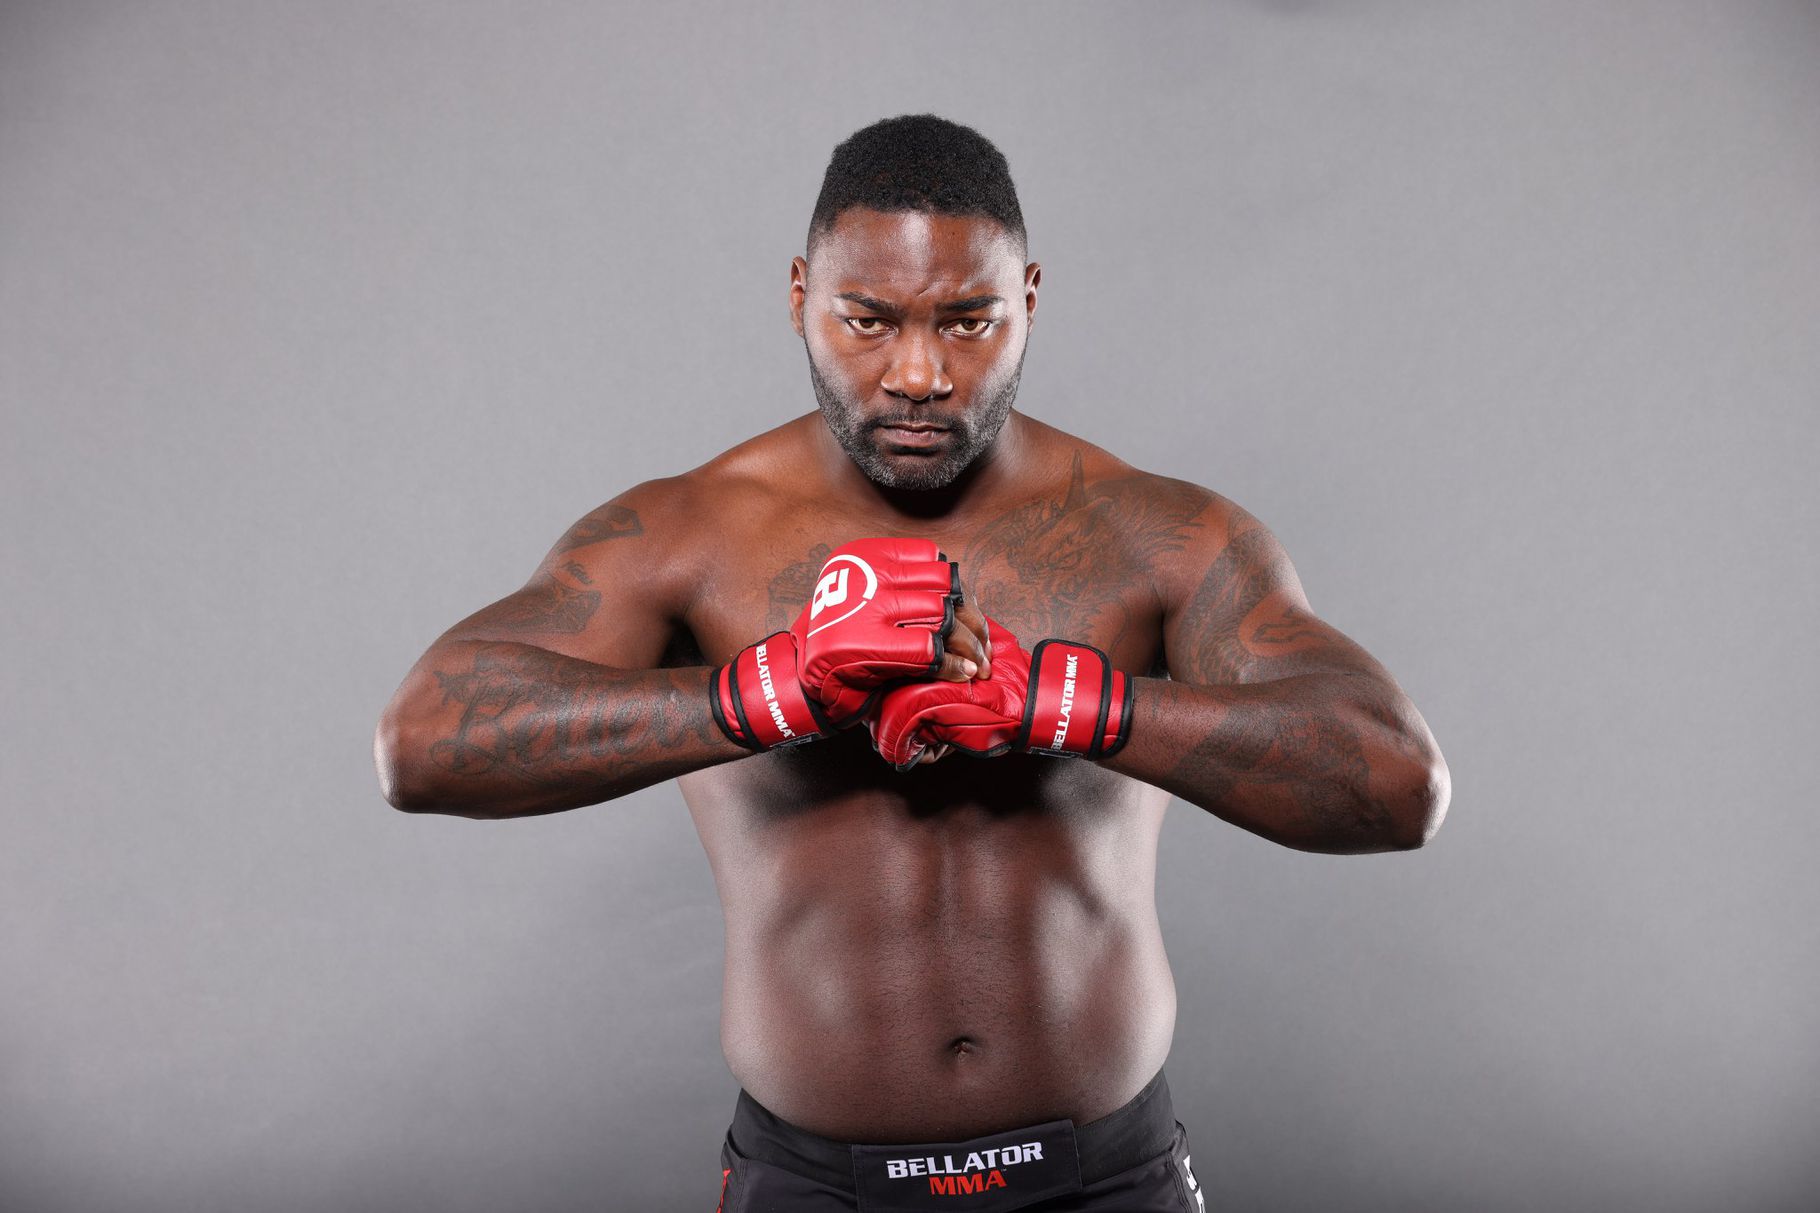 Rumble Johnson prepares for his first bout in 4 years